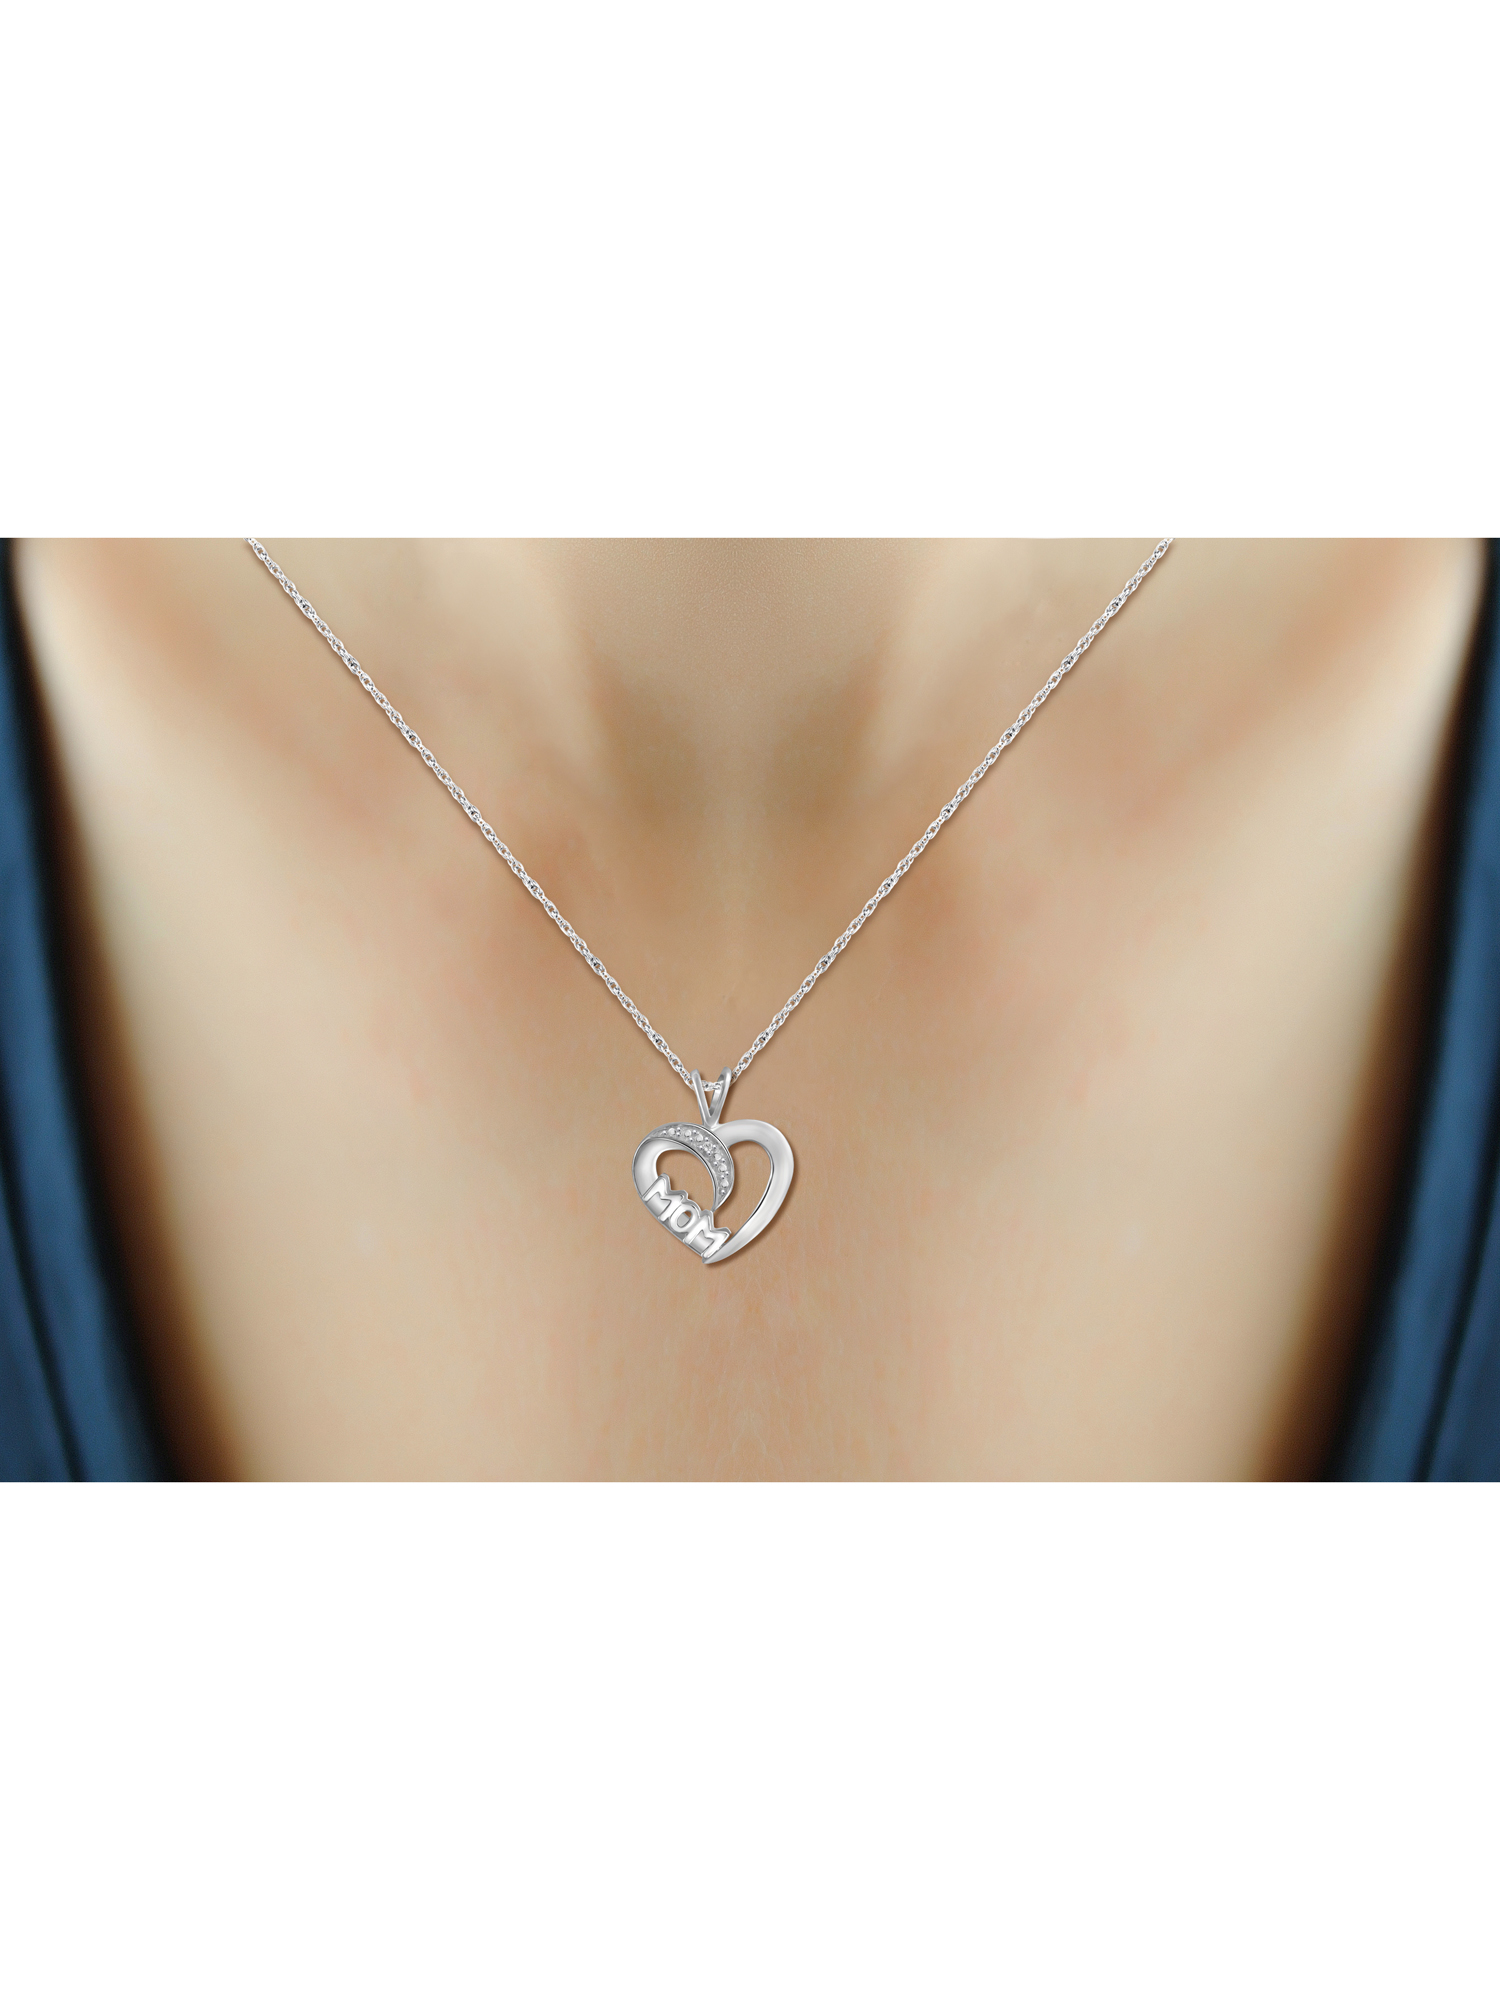 White Diamond Accent Sterling Silver Mother Heart Pendant - image 3 of 5